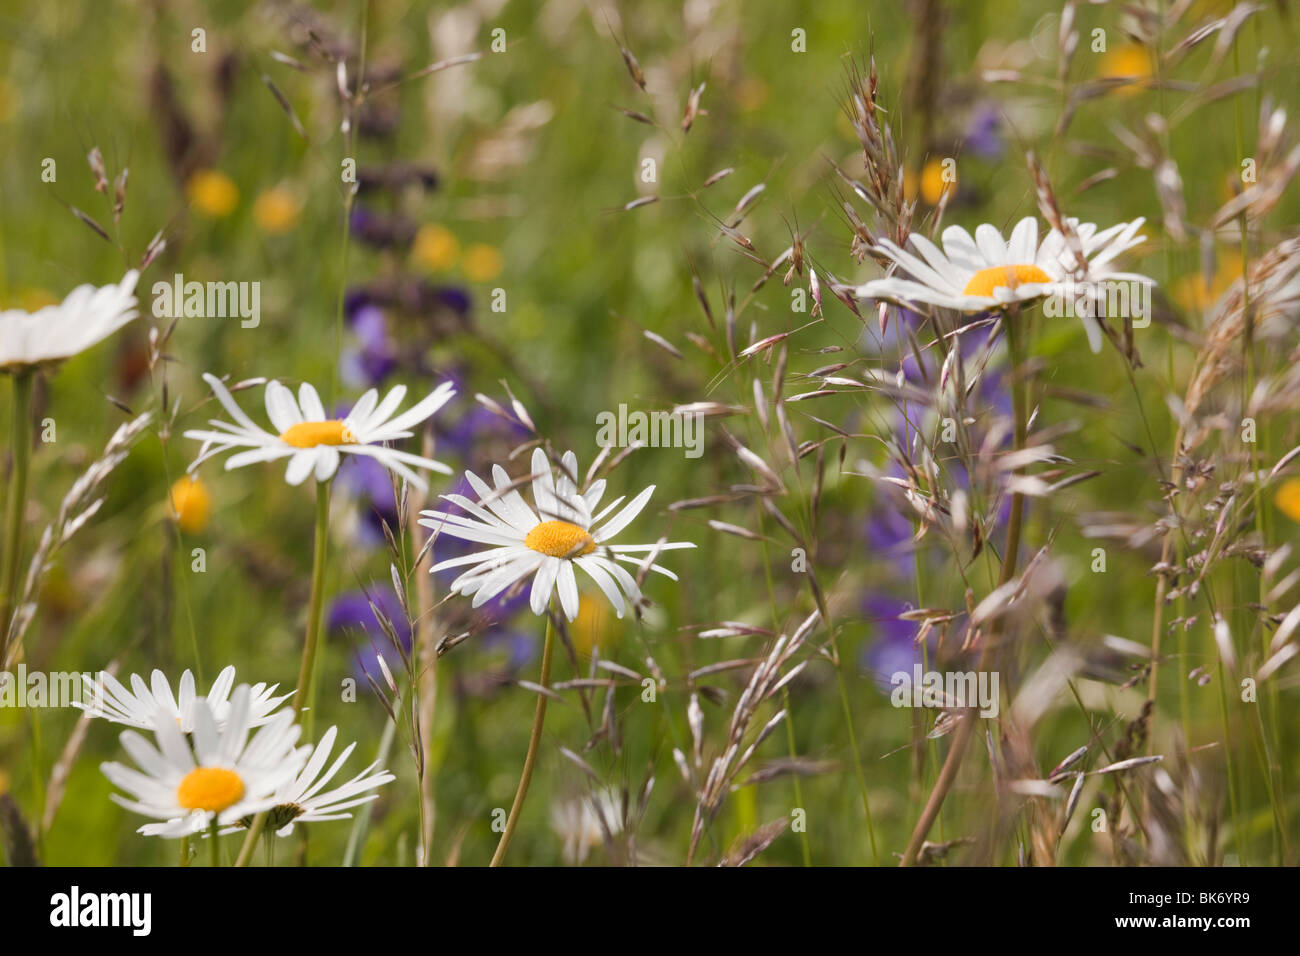 Europe. Ox-eye Daisies (Leucanthemum vulgare) growing with wild grasses in a wildflower meadow Stock Photo